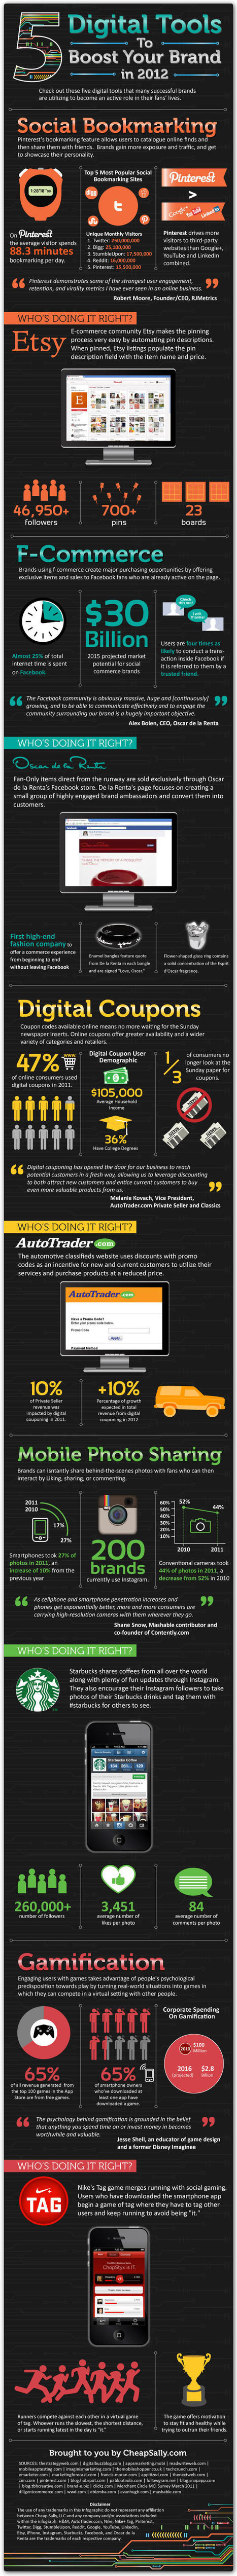 5 Digital Tools to Boost Your Brand in 2012 Infographic | Latest Social Media News | Scoop.it